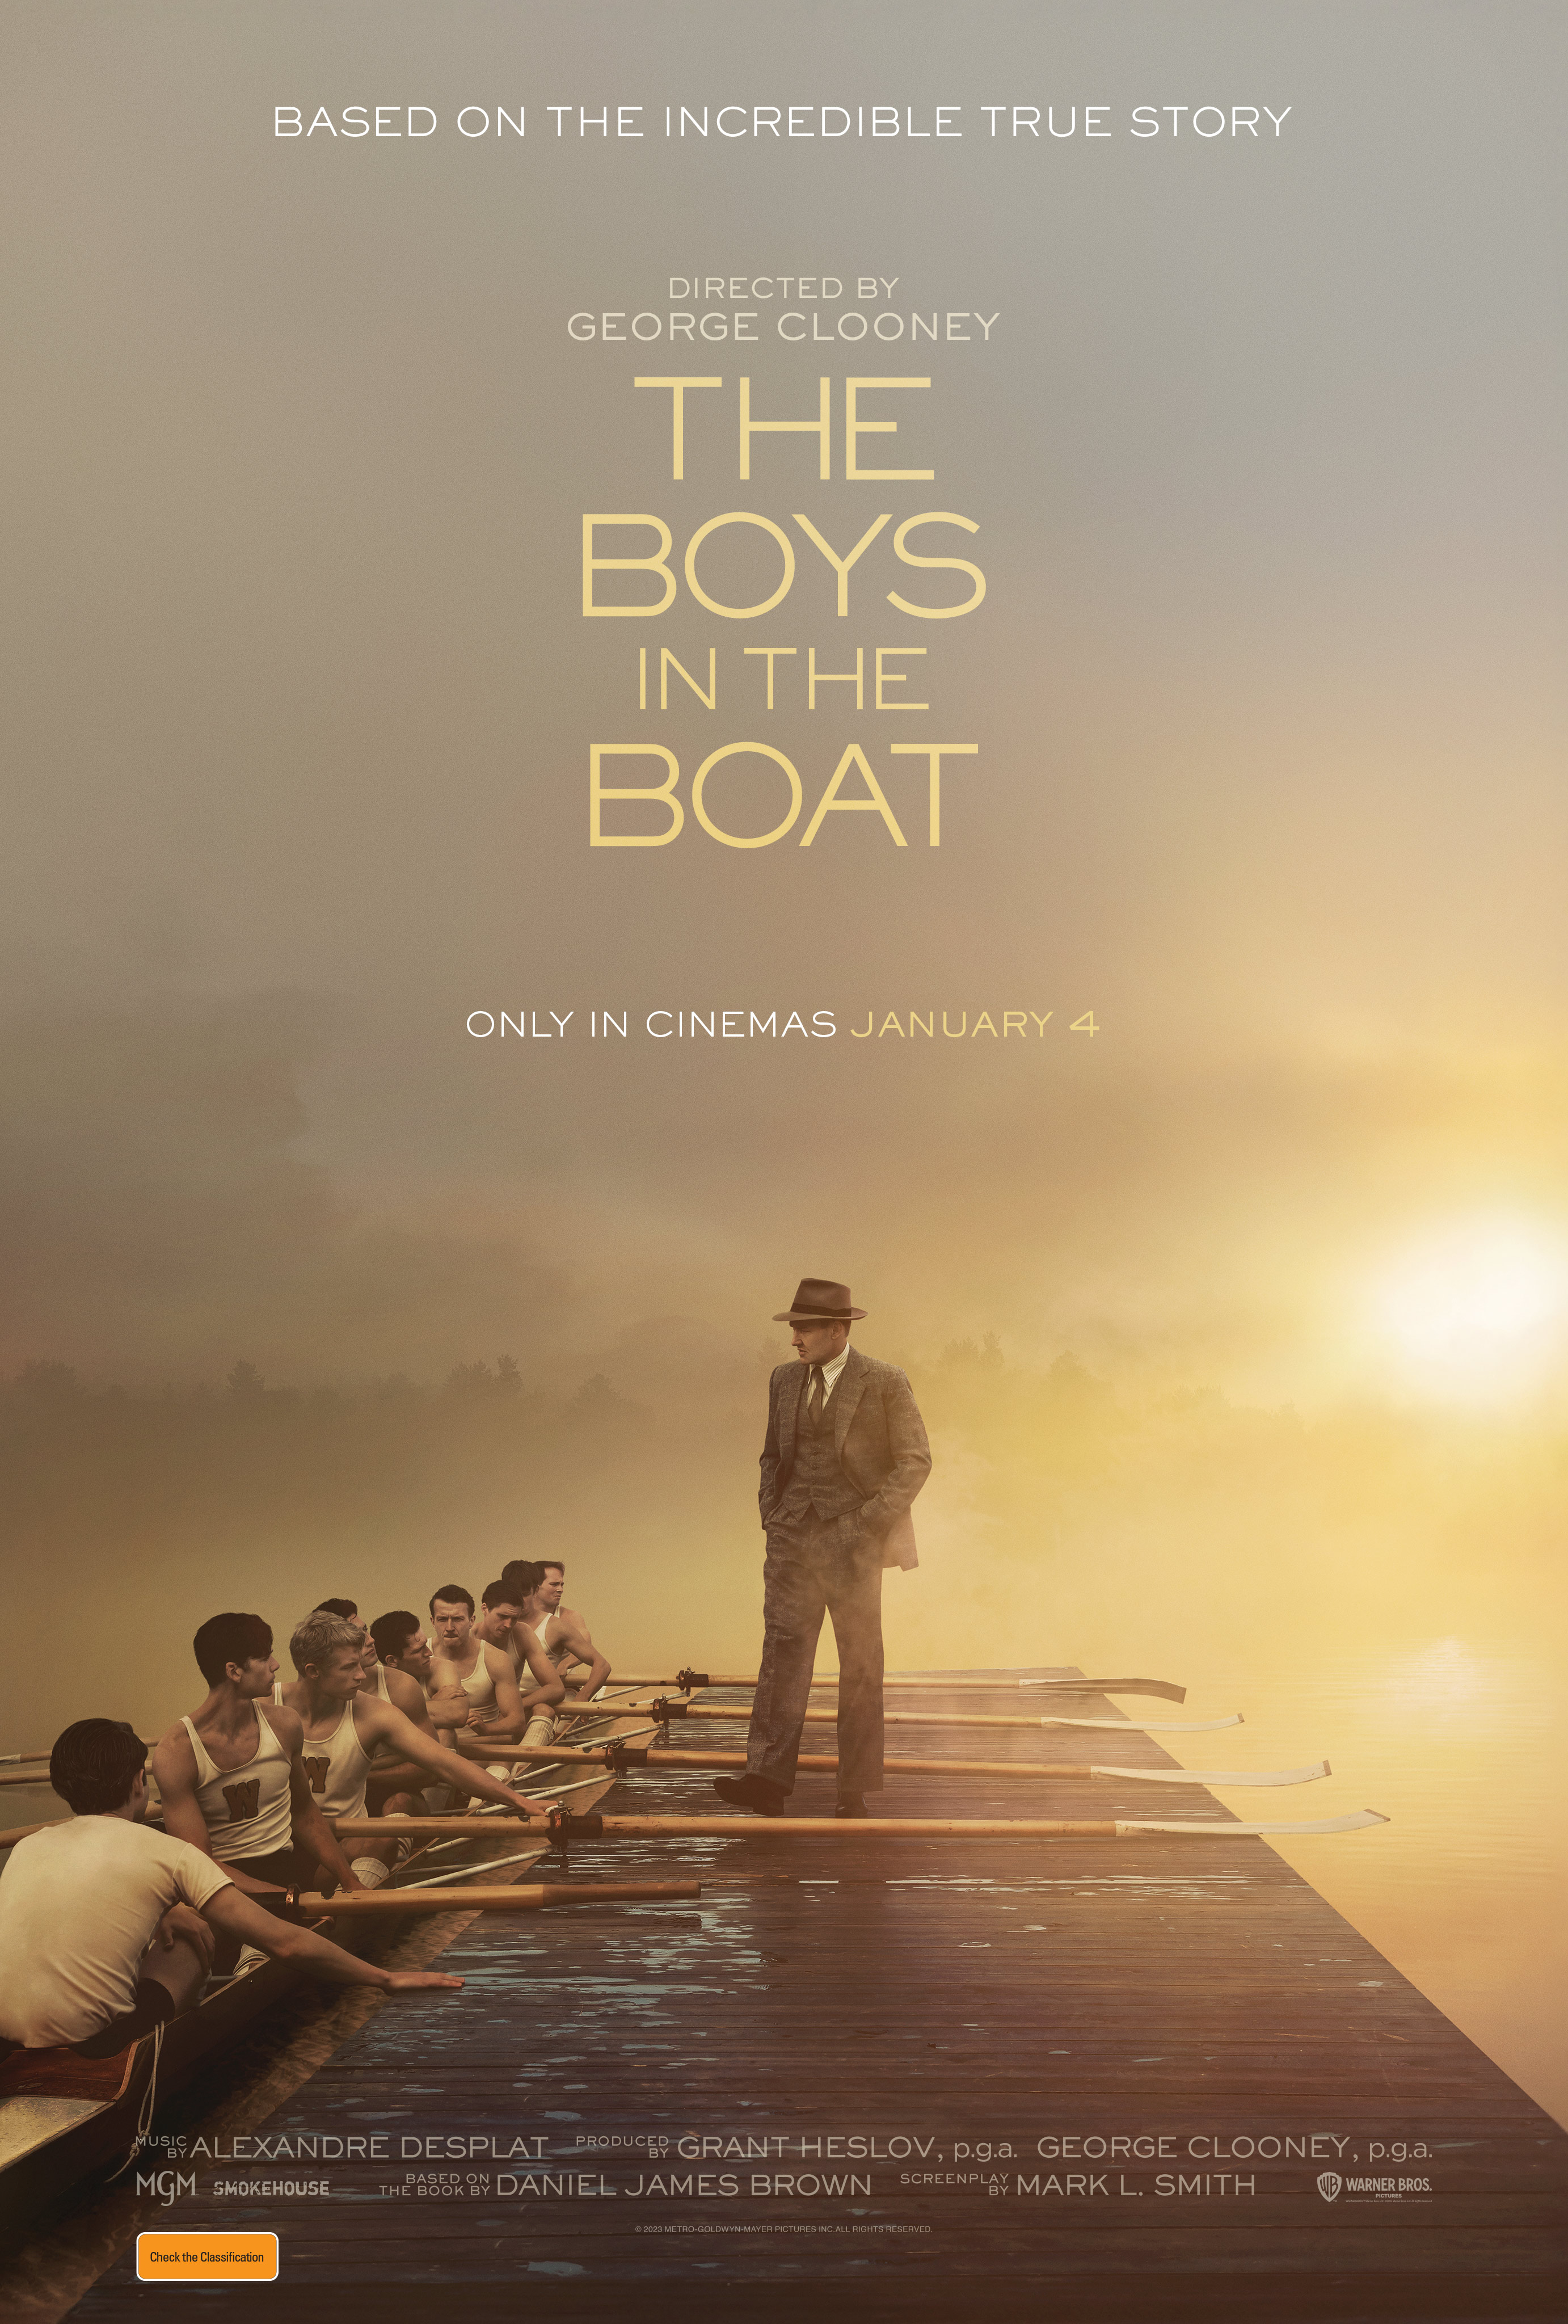 https://imgix.hoyts.com.au/mx/posters/au/the-boys-in-the-boat-f6a6366b.jpg